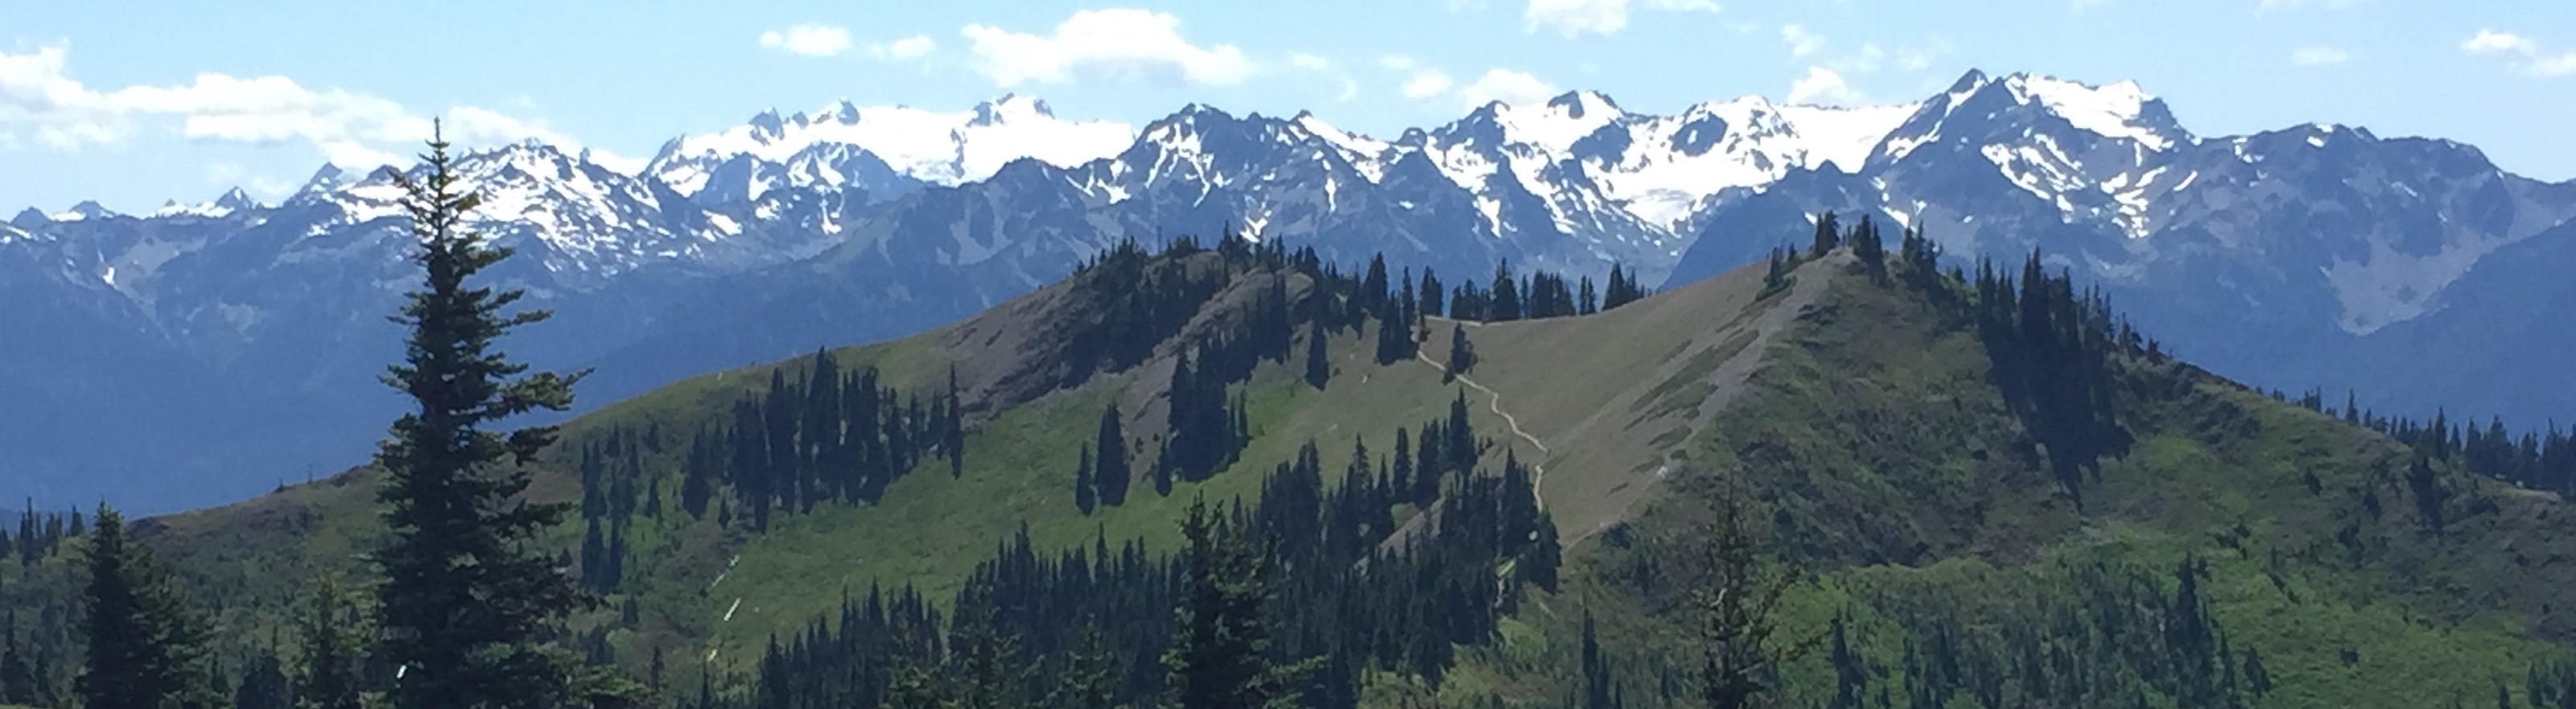 Snow capped mountain range with trees in the foreground